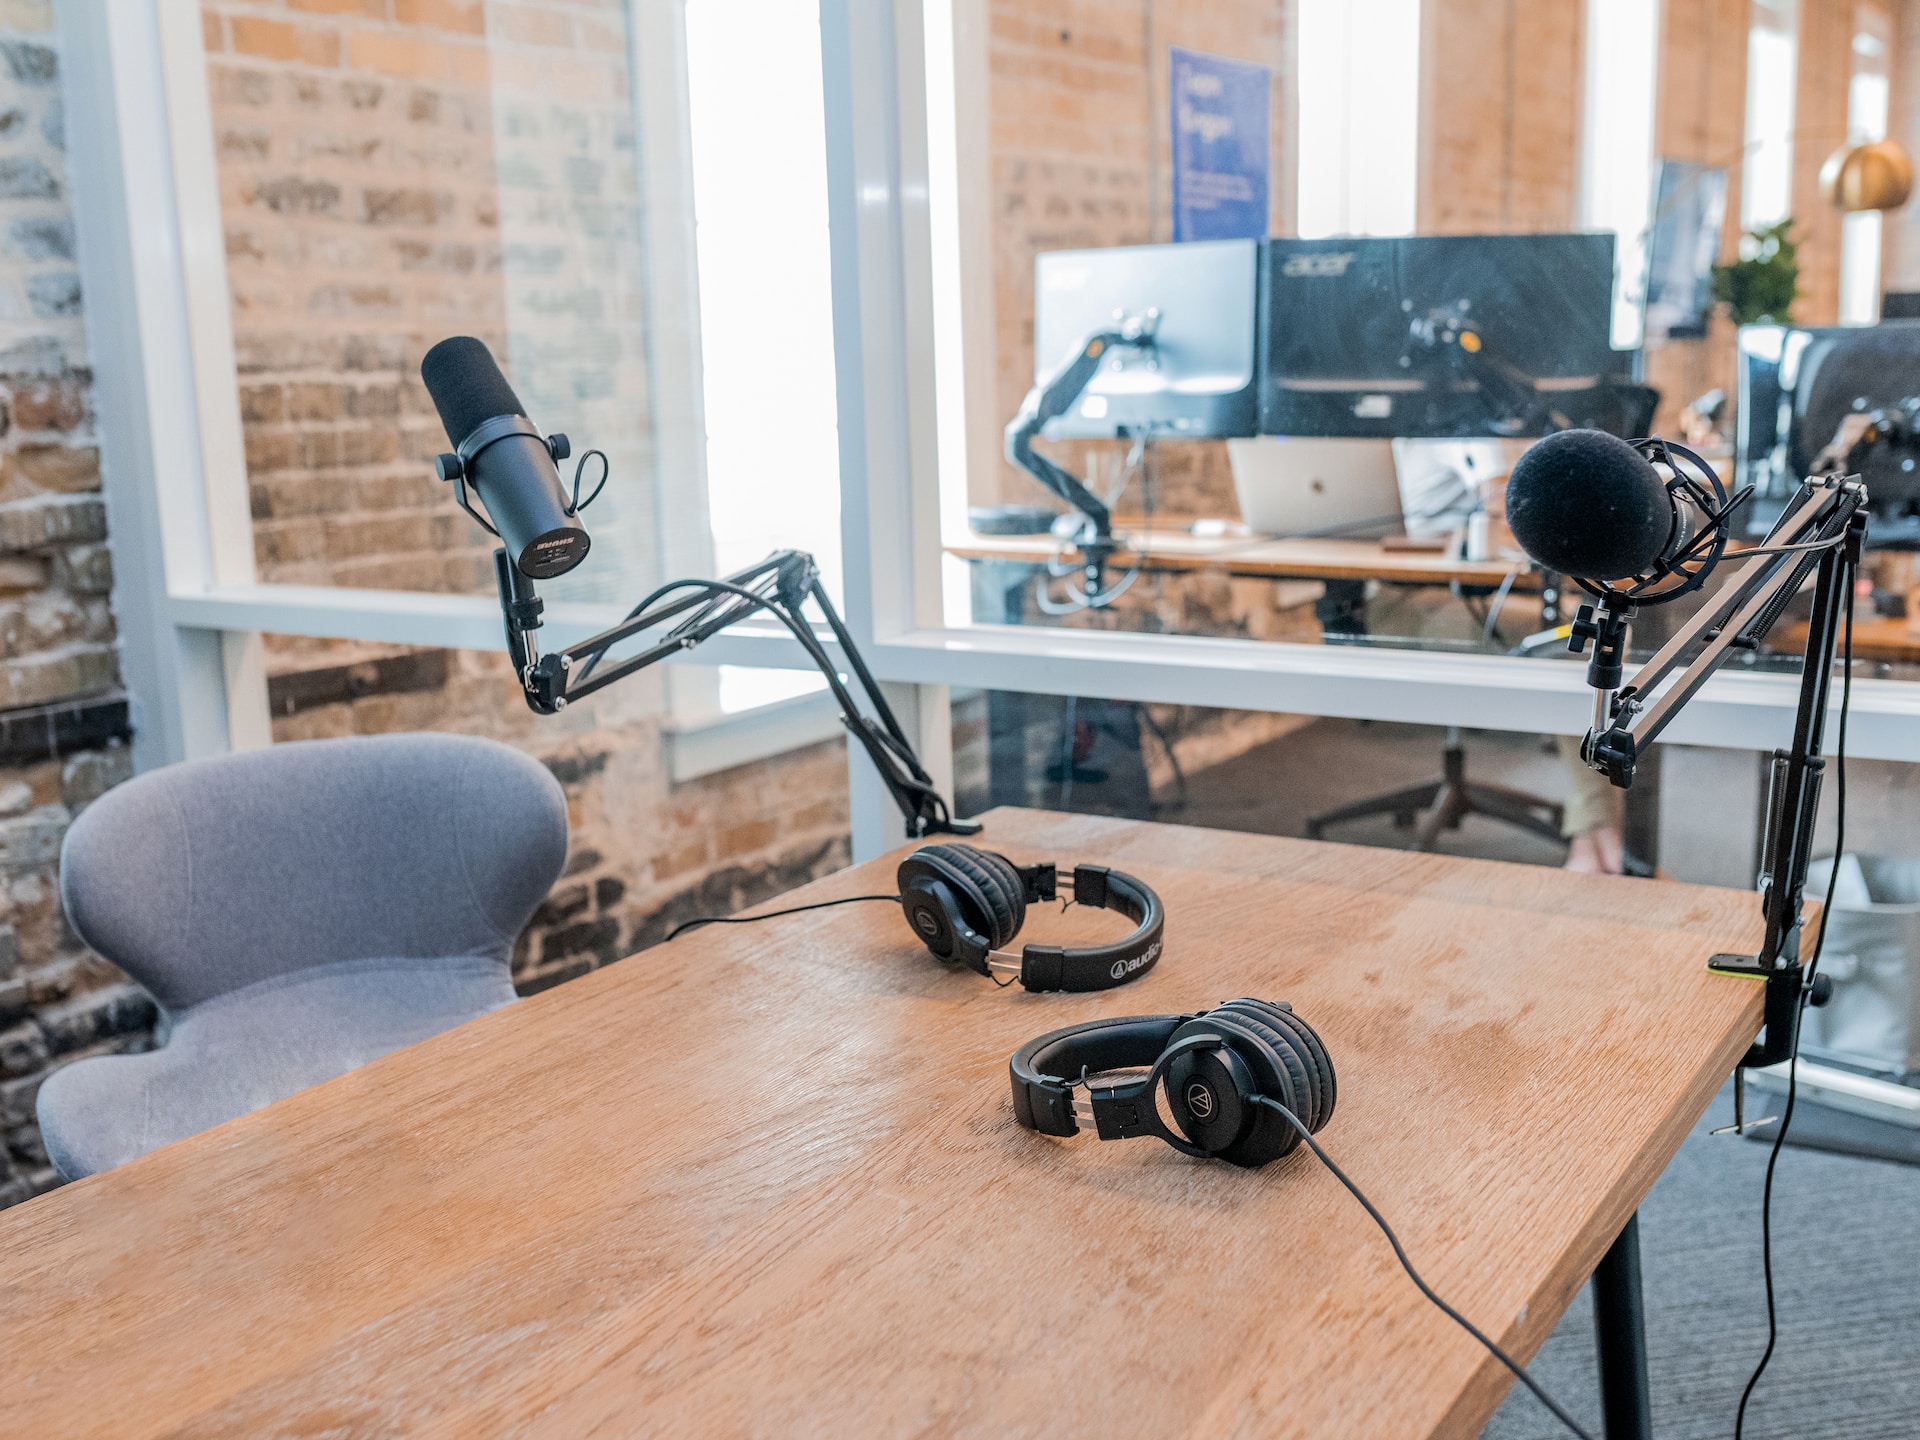 Photo of what appears to be an in-office podcast studio: a wooden table, with a microphone and set of headphones on either side.  An office environment is visible in the background, through a glass wall.  Photo by Austin Distel on Unsplash.